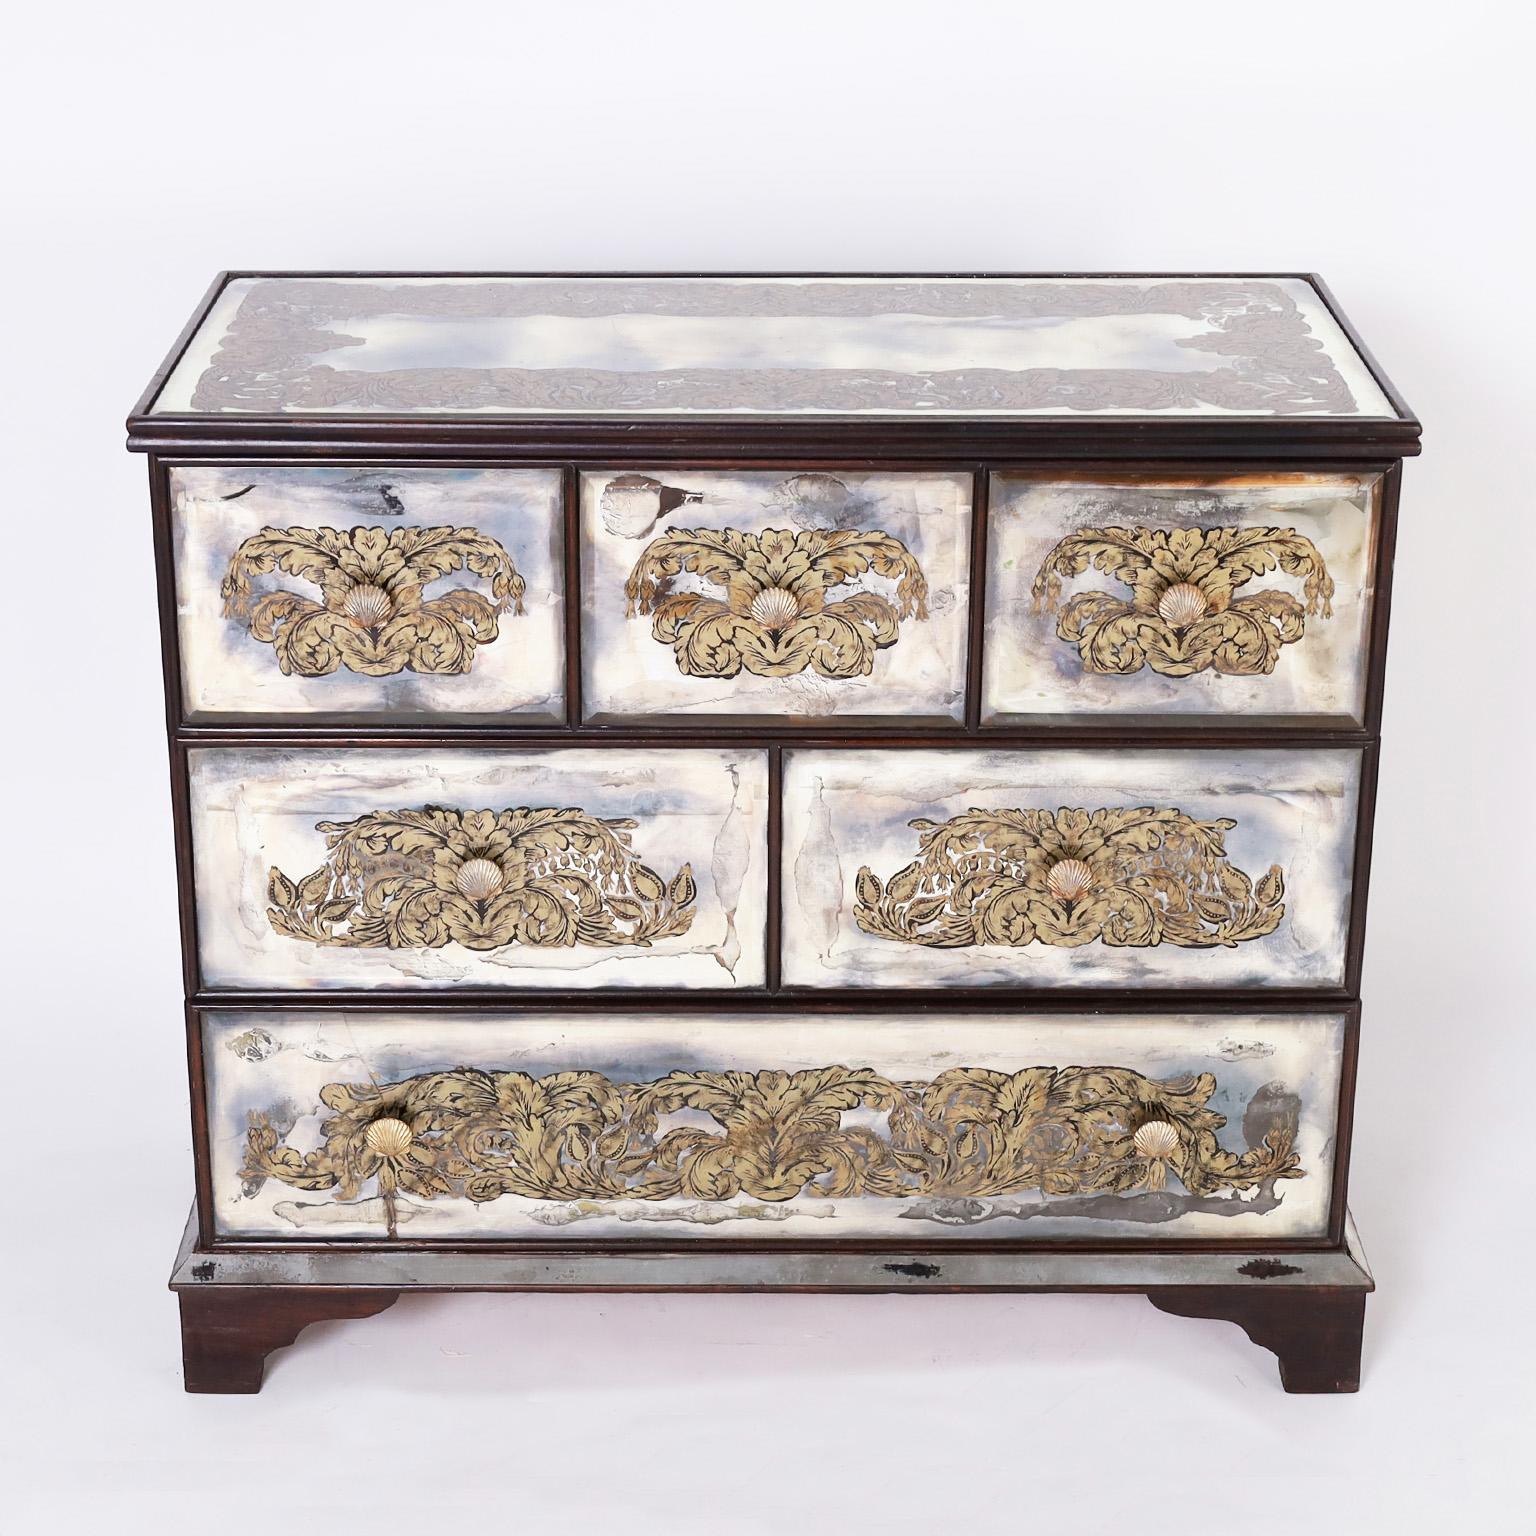 Hollywood regency style Italian chest with six drawers having an ebonized frame and featuring beveled mirrors on the top, front, and sides decorated with dramatic églomisé floral designs and brass seashell hardware. Bottom drawer with a small crack.